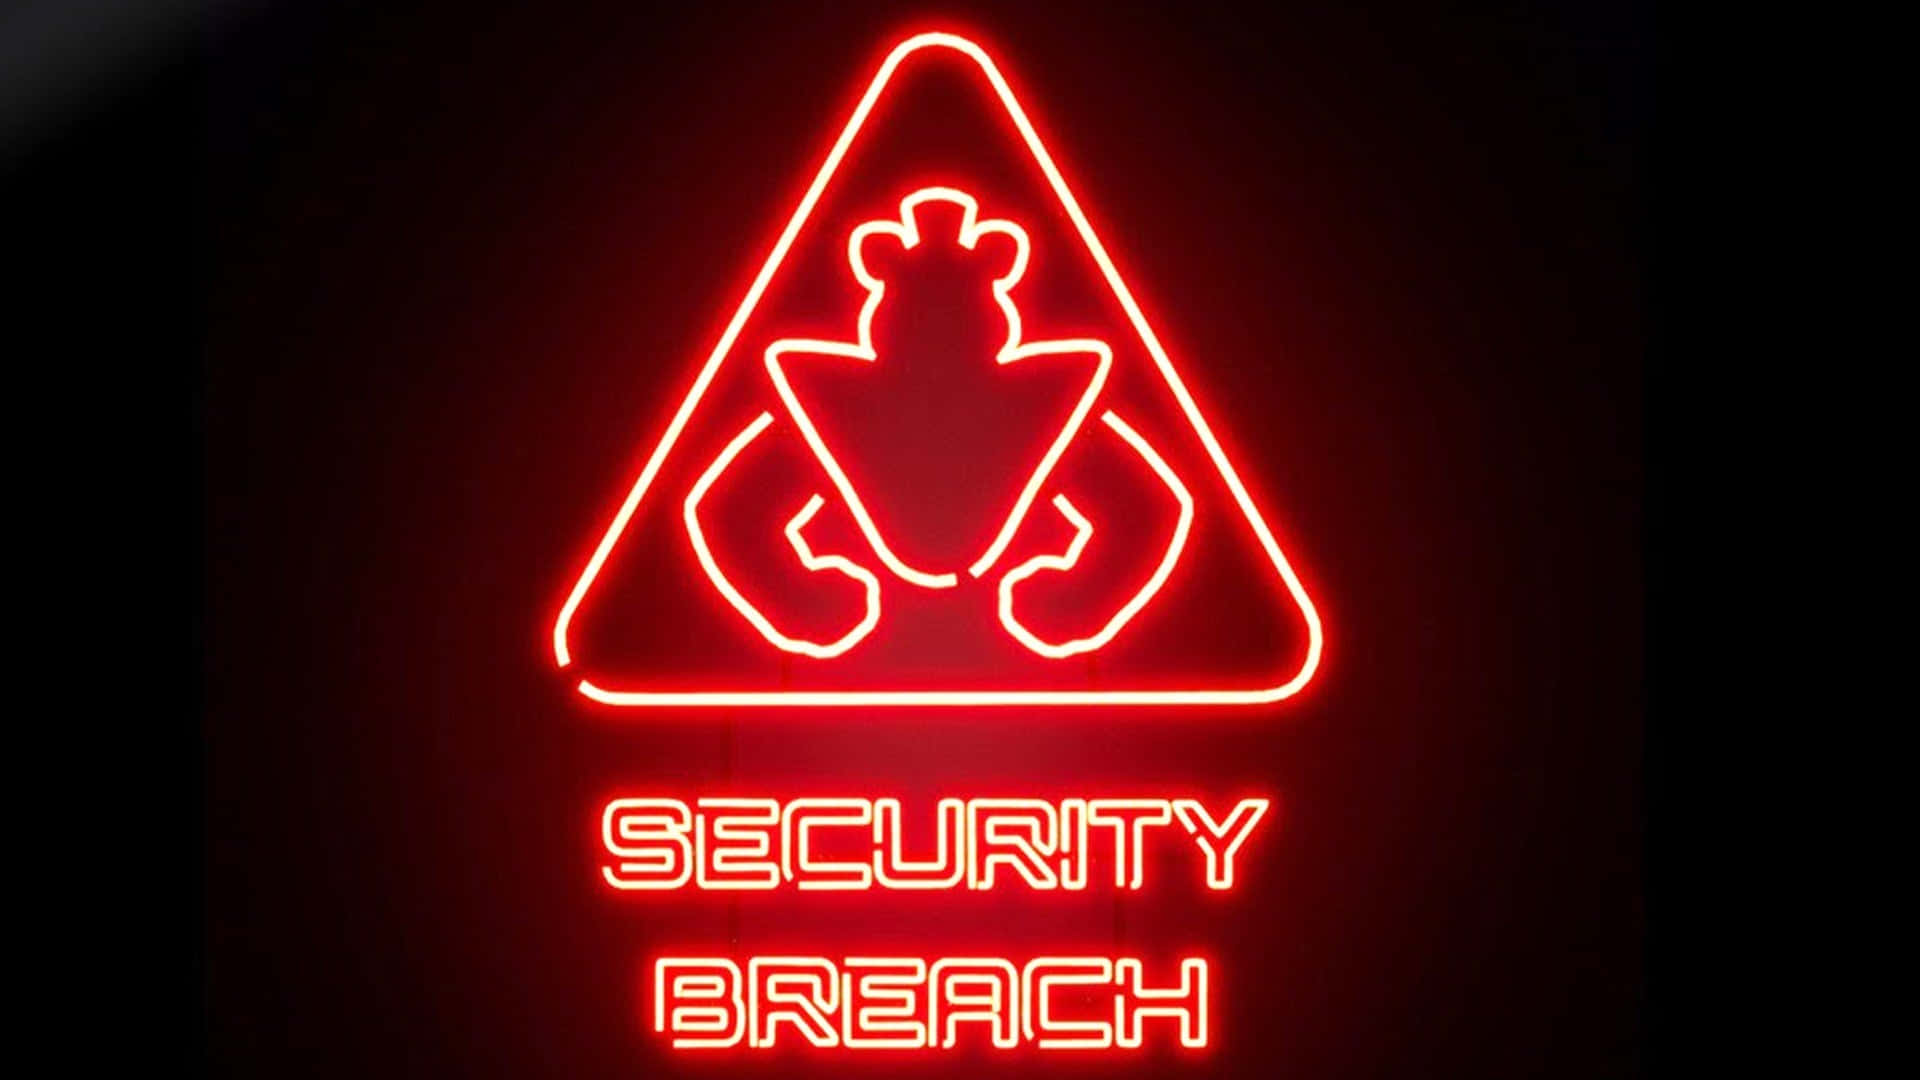 Security Breach Background Wallpaper